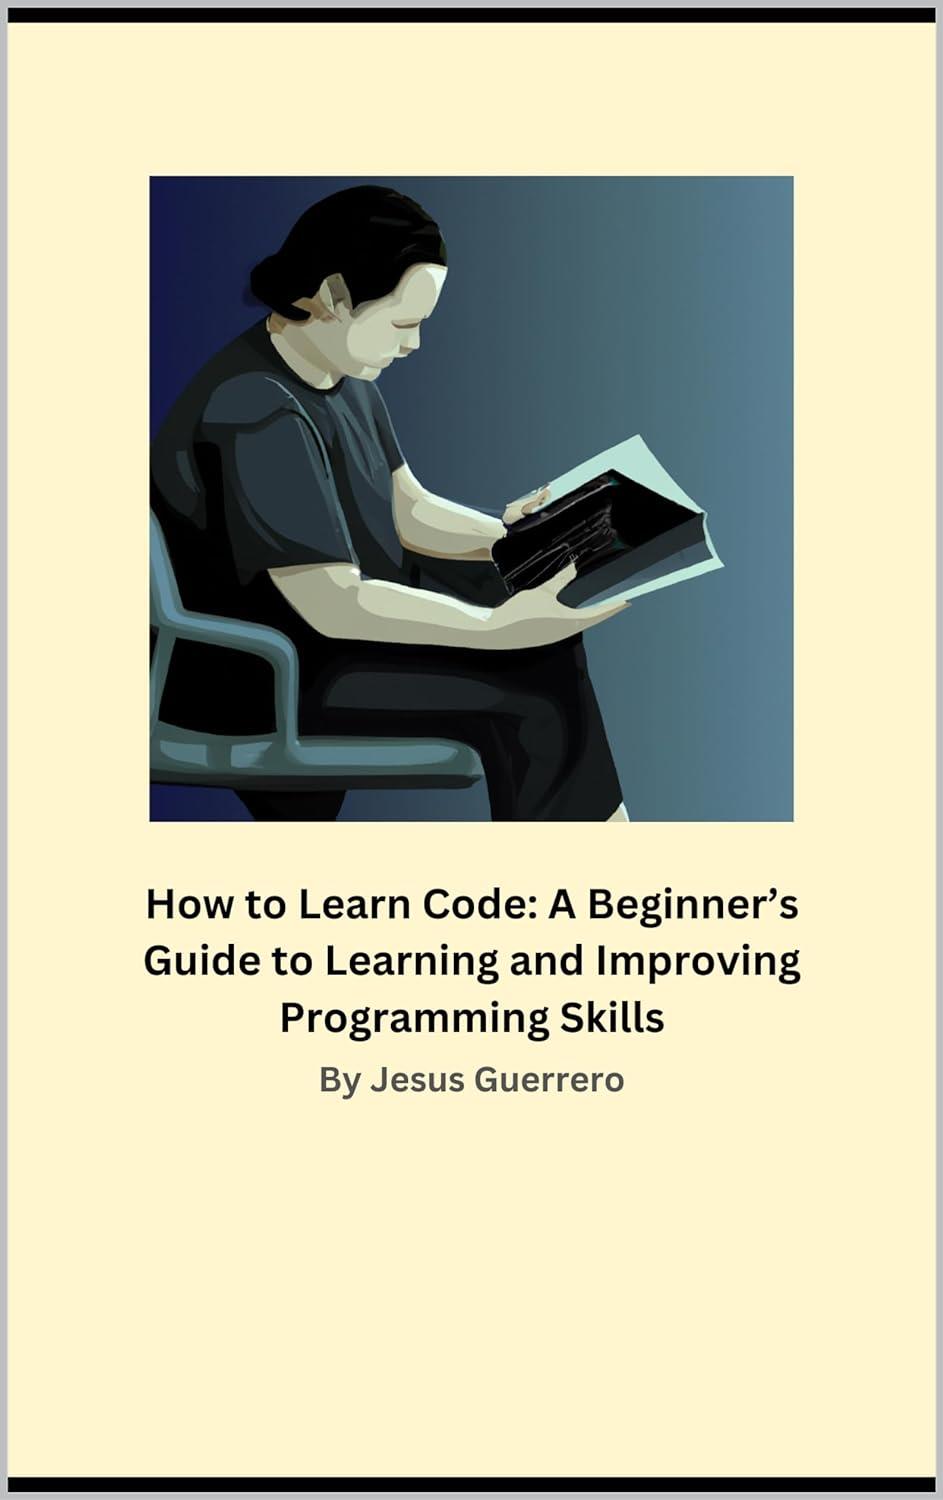 How to Learn Code